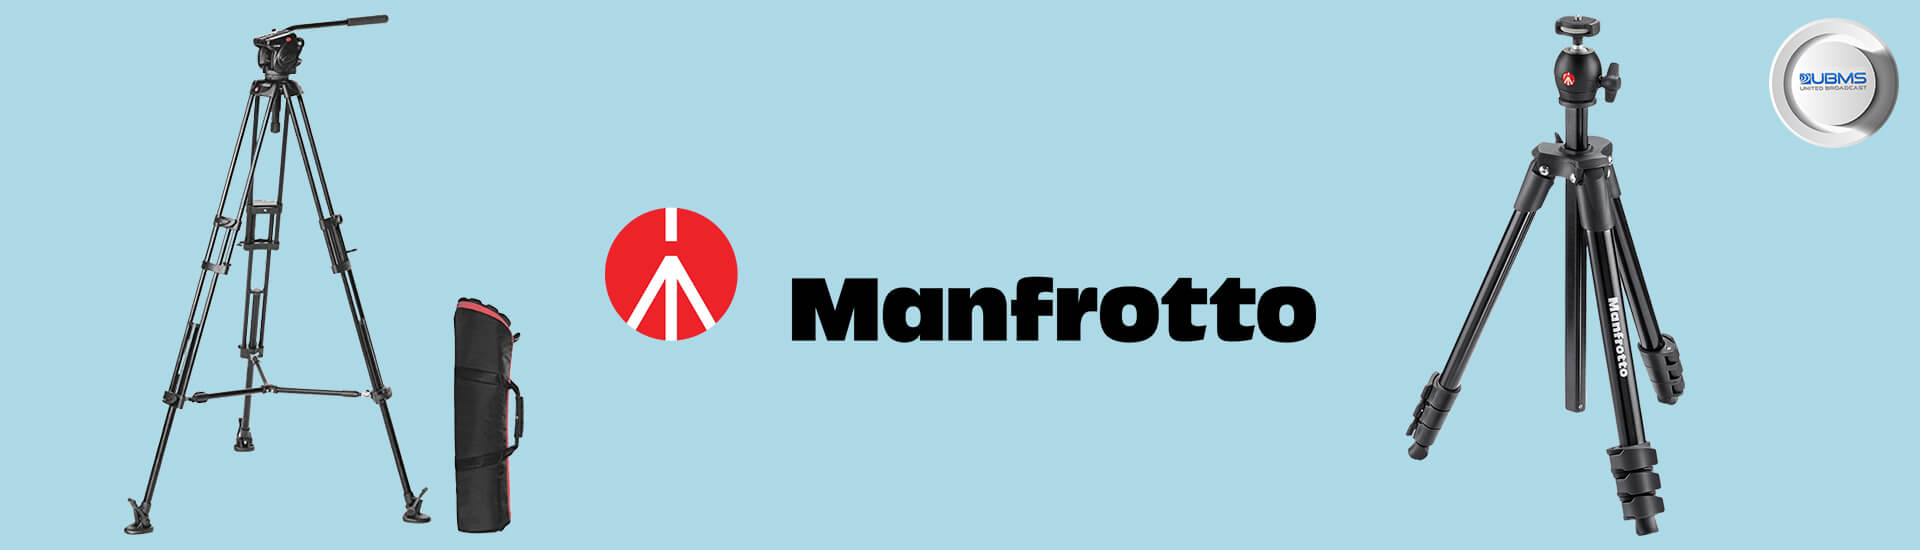 How to Use a Manfrotto Tripod for Professional Video Production